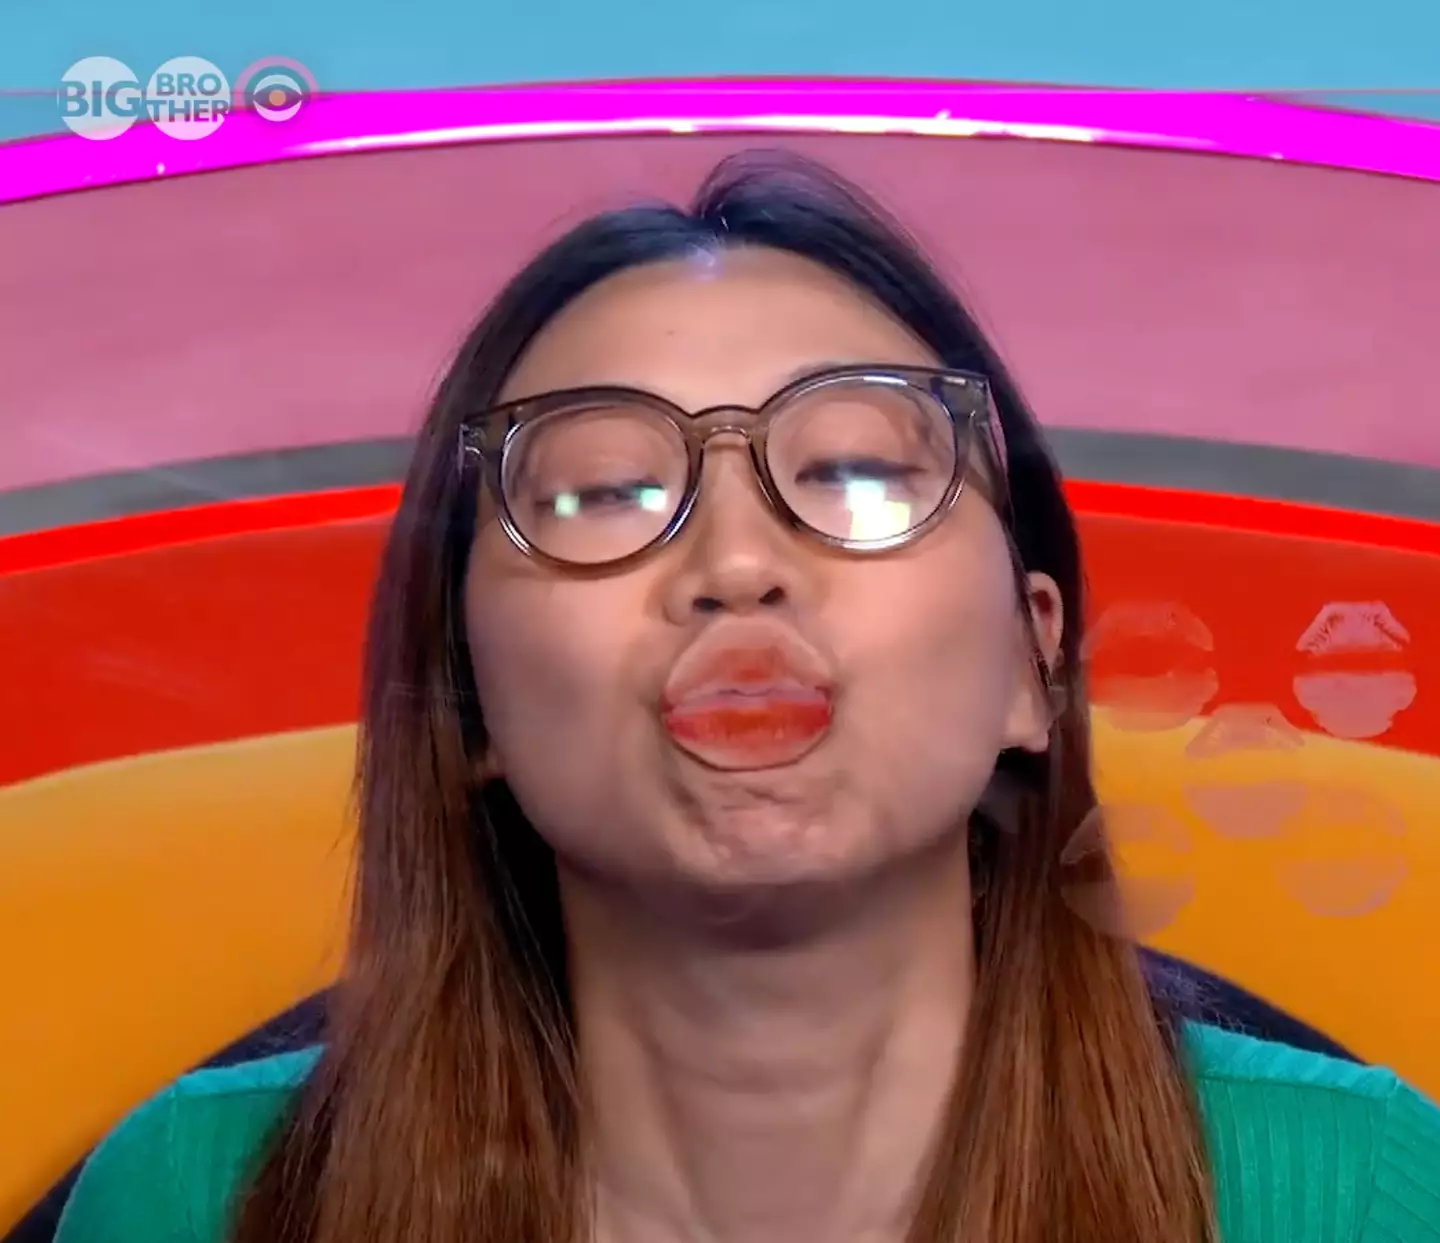 The housemates got down and dirty during the kiss challenge.